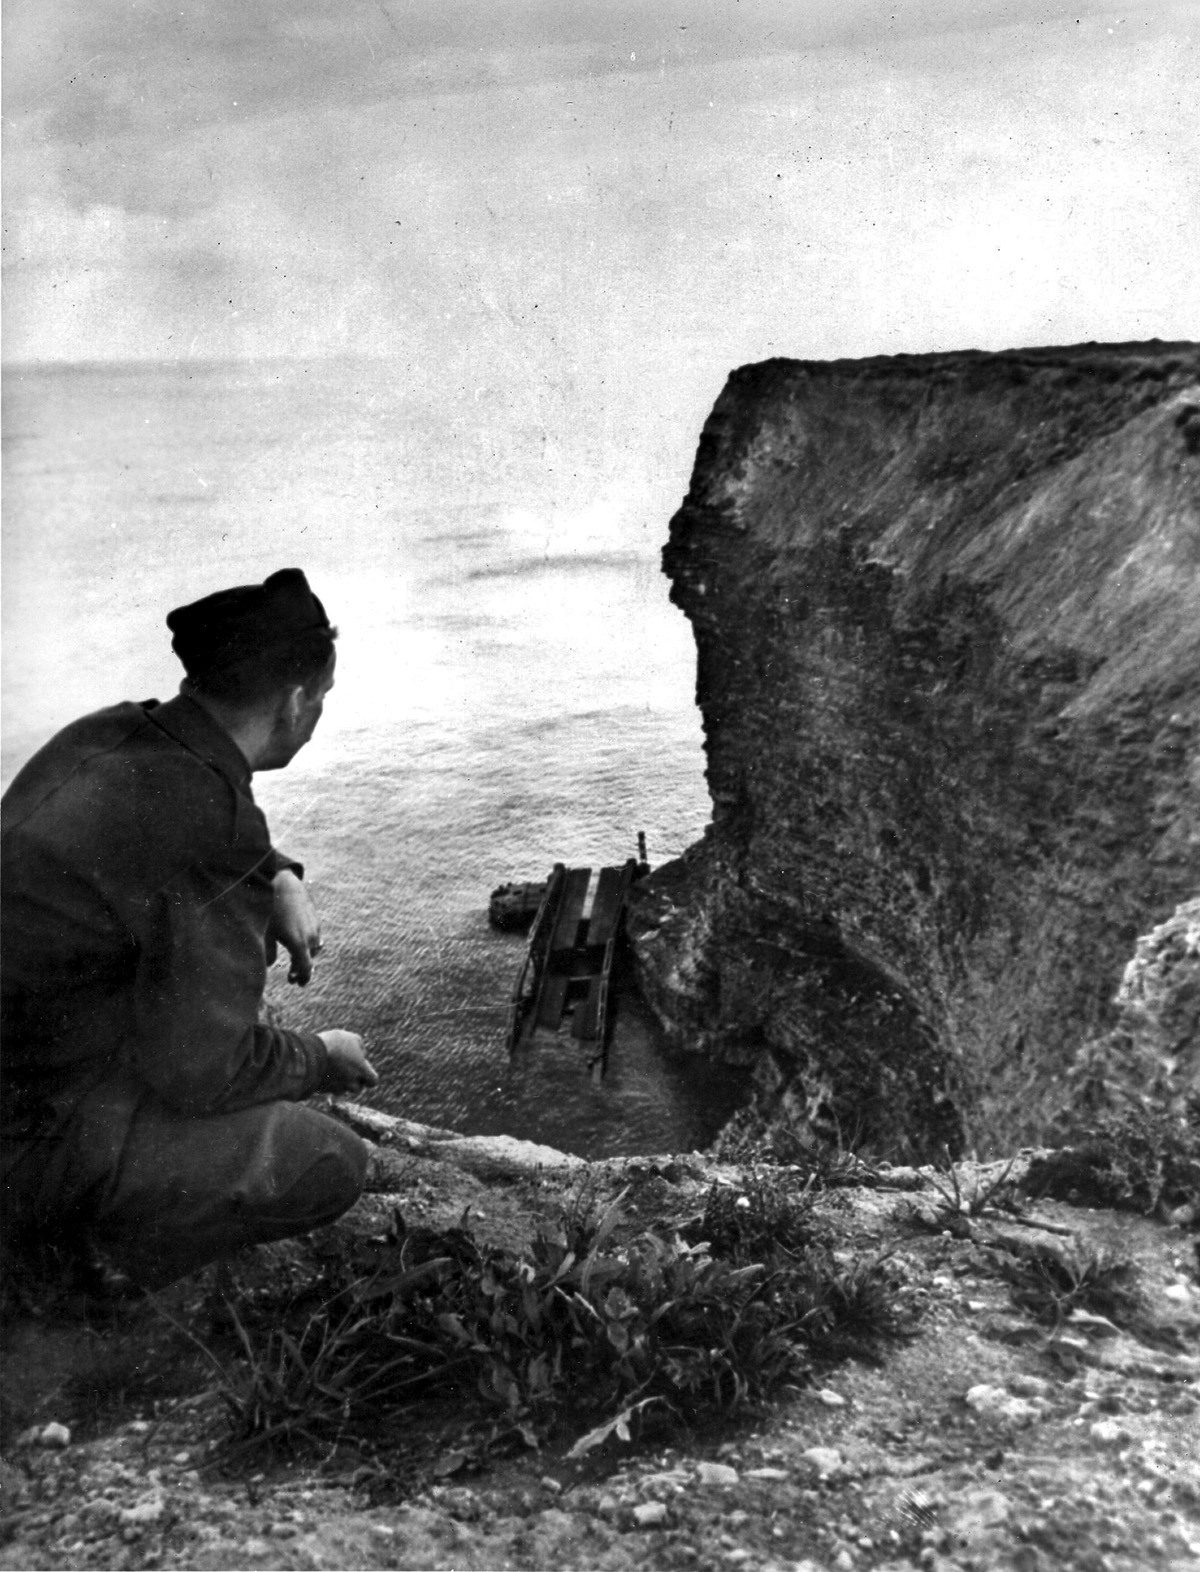 A Stars & Stripes reporter views a wrecked treadway section of a Mulberry artificial harbor marooned below the cliffs of Pointe du Hoc, scene of U.S. Rangers’ heroics.